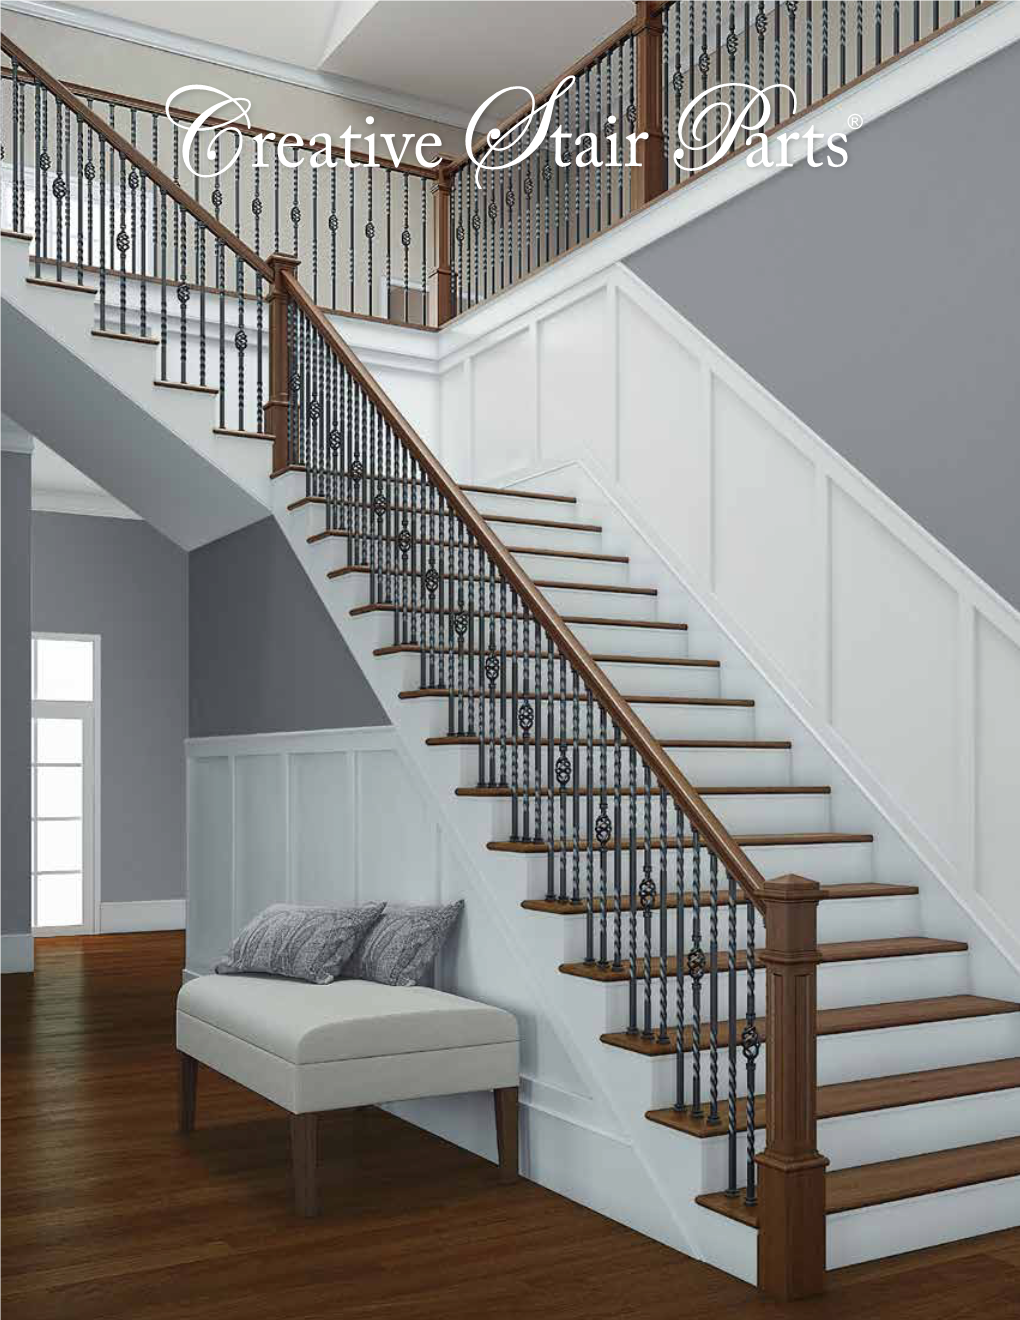 Stair Parts Has Fully Stocked Warehouses Ready to Service Your Stair Concept-To-Build Needs